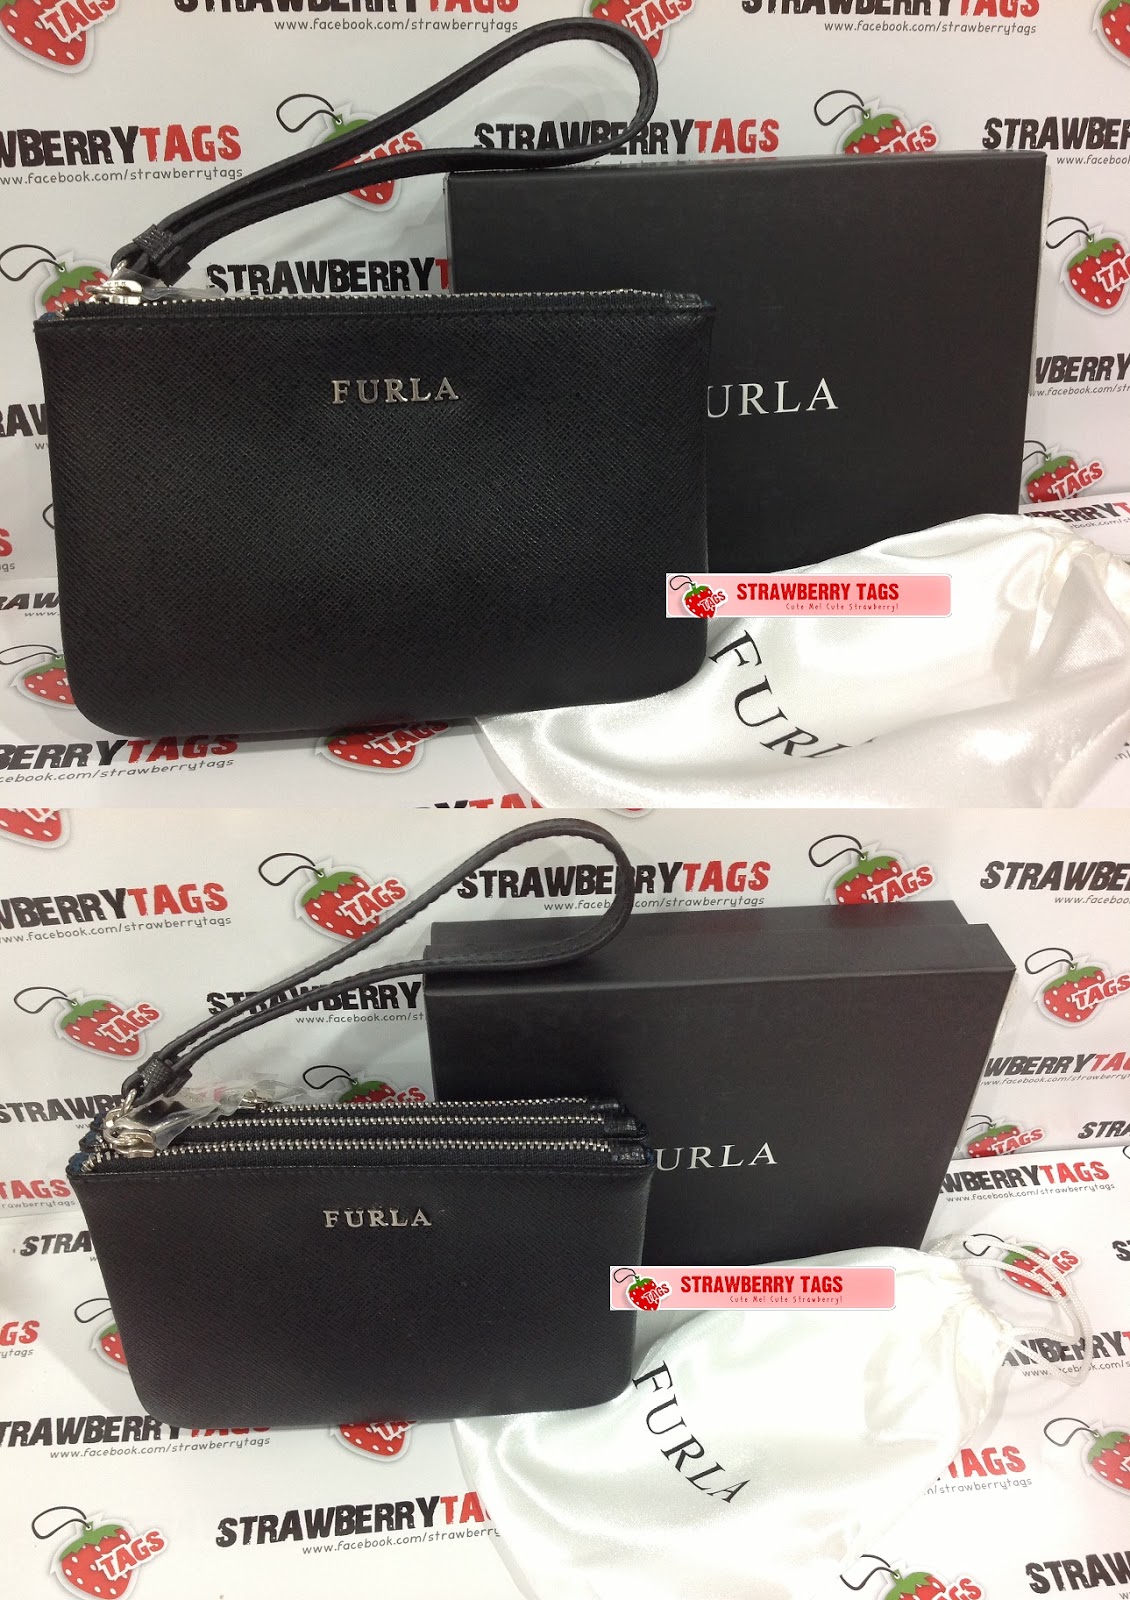 ~StrawBerry TaGs~: FURLA Saffiano Leather 3-pc Linked Wristlet (in Black)